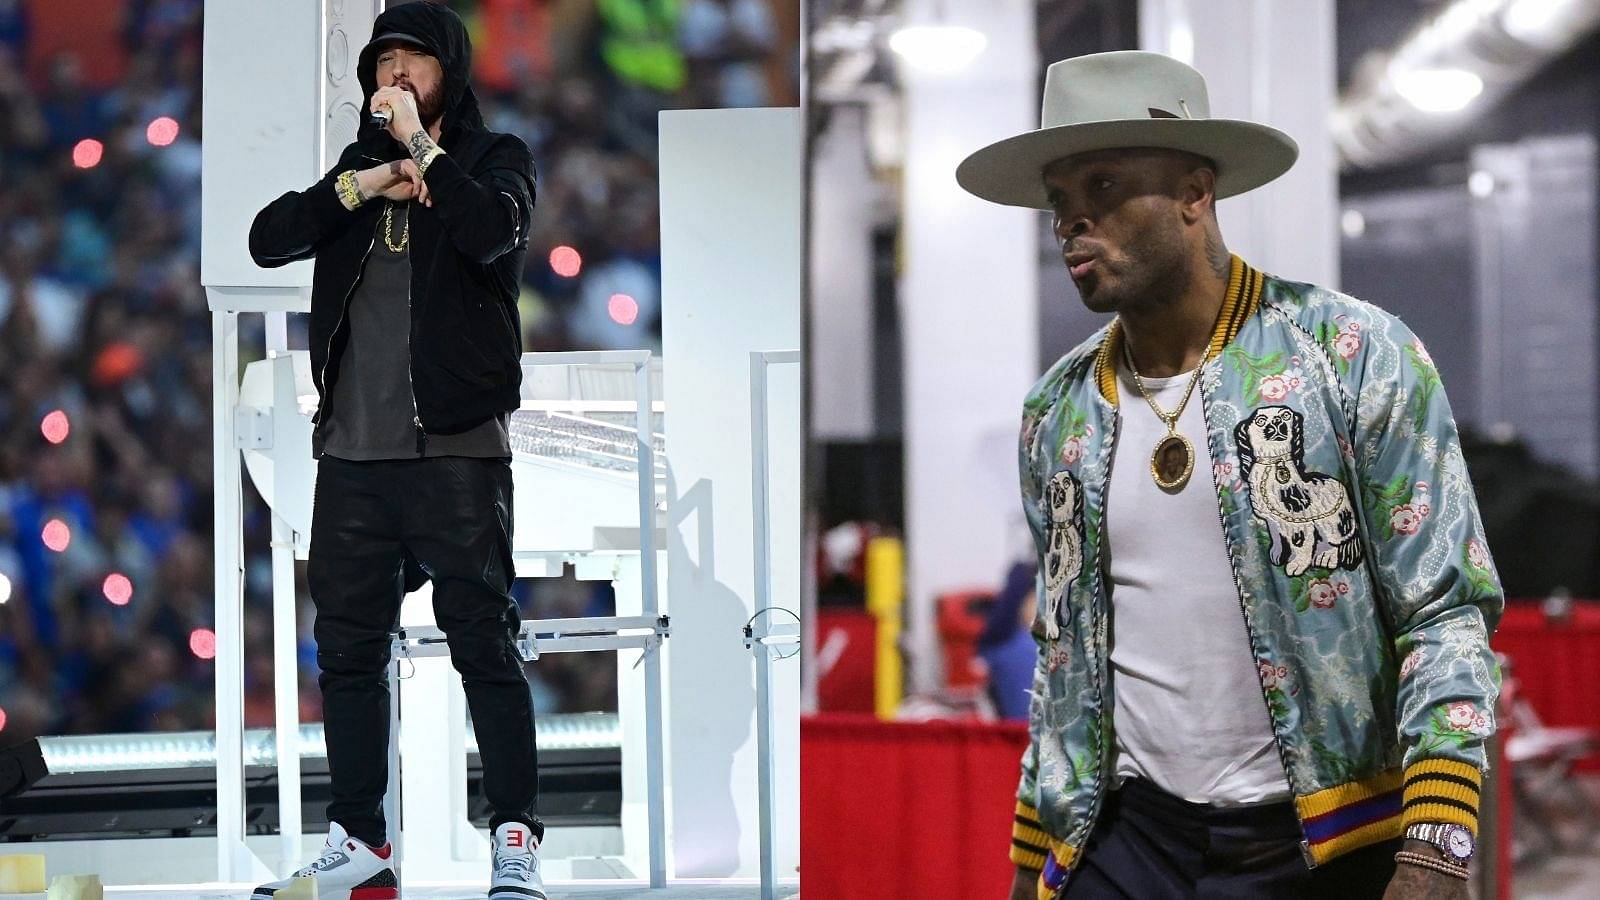 "PJ Tucker going to hoop in these by tomorrow": Eminem rocks Super Bowl eve while showing off his new Air Jordans, NBA Twitter makes connection with the Heat star